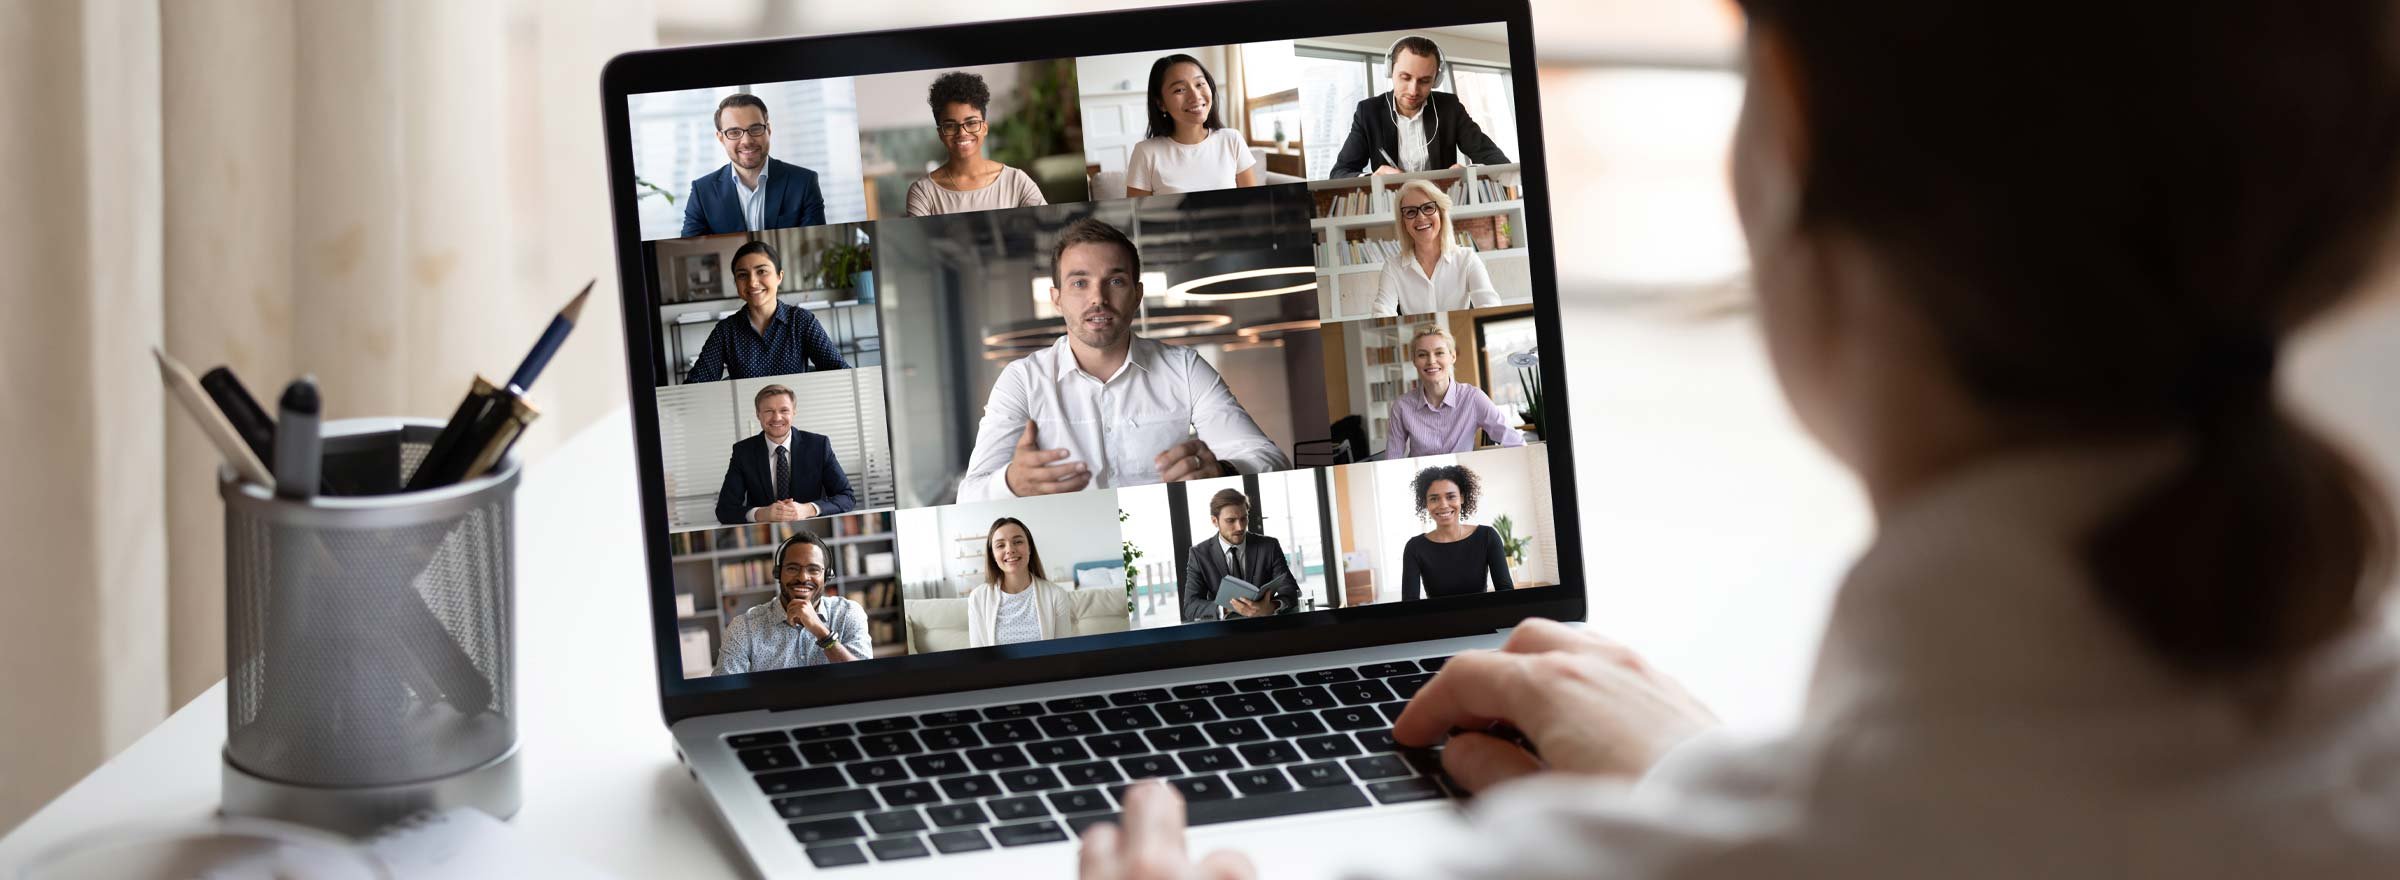 woman having an online video conference with 12 other people